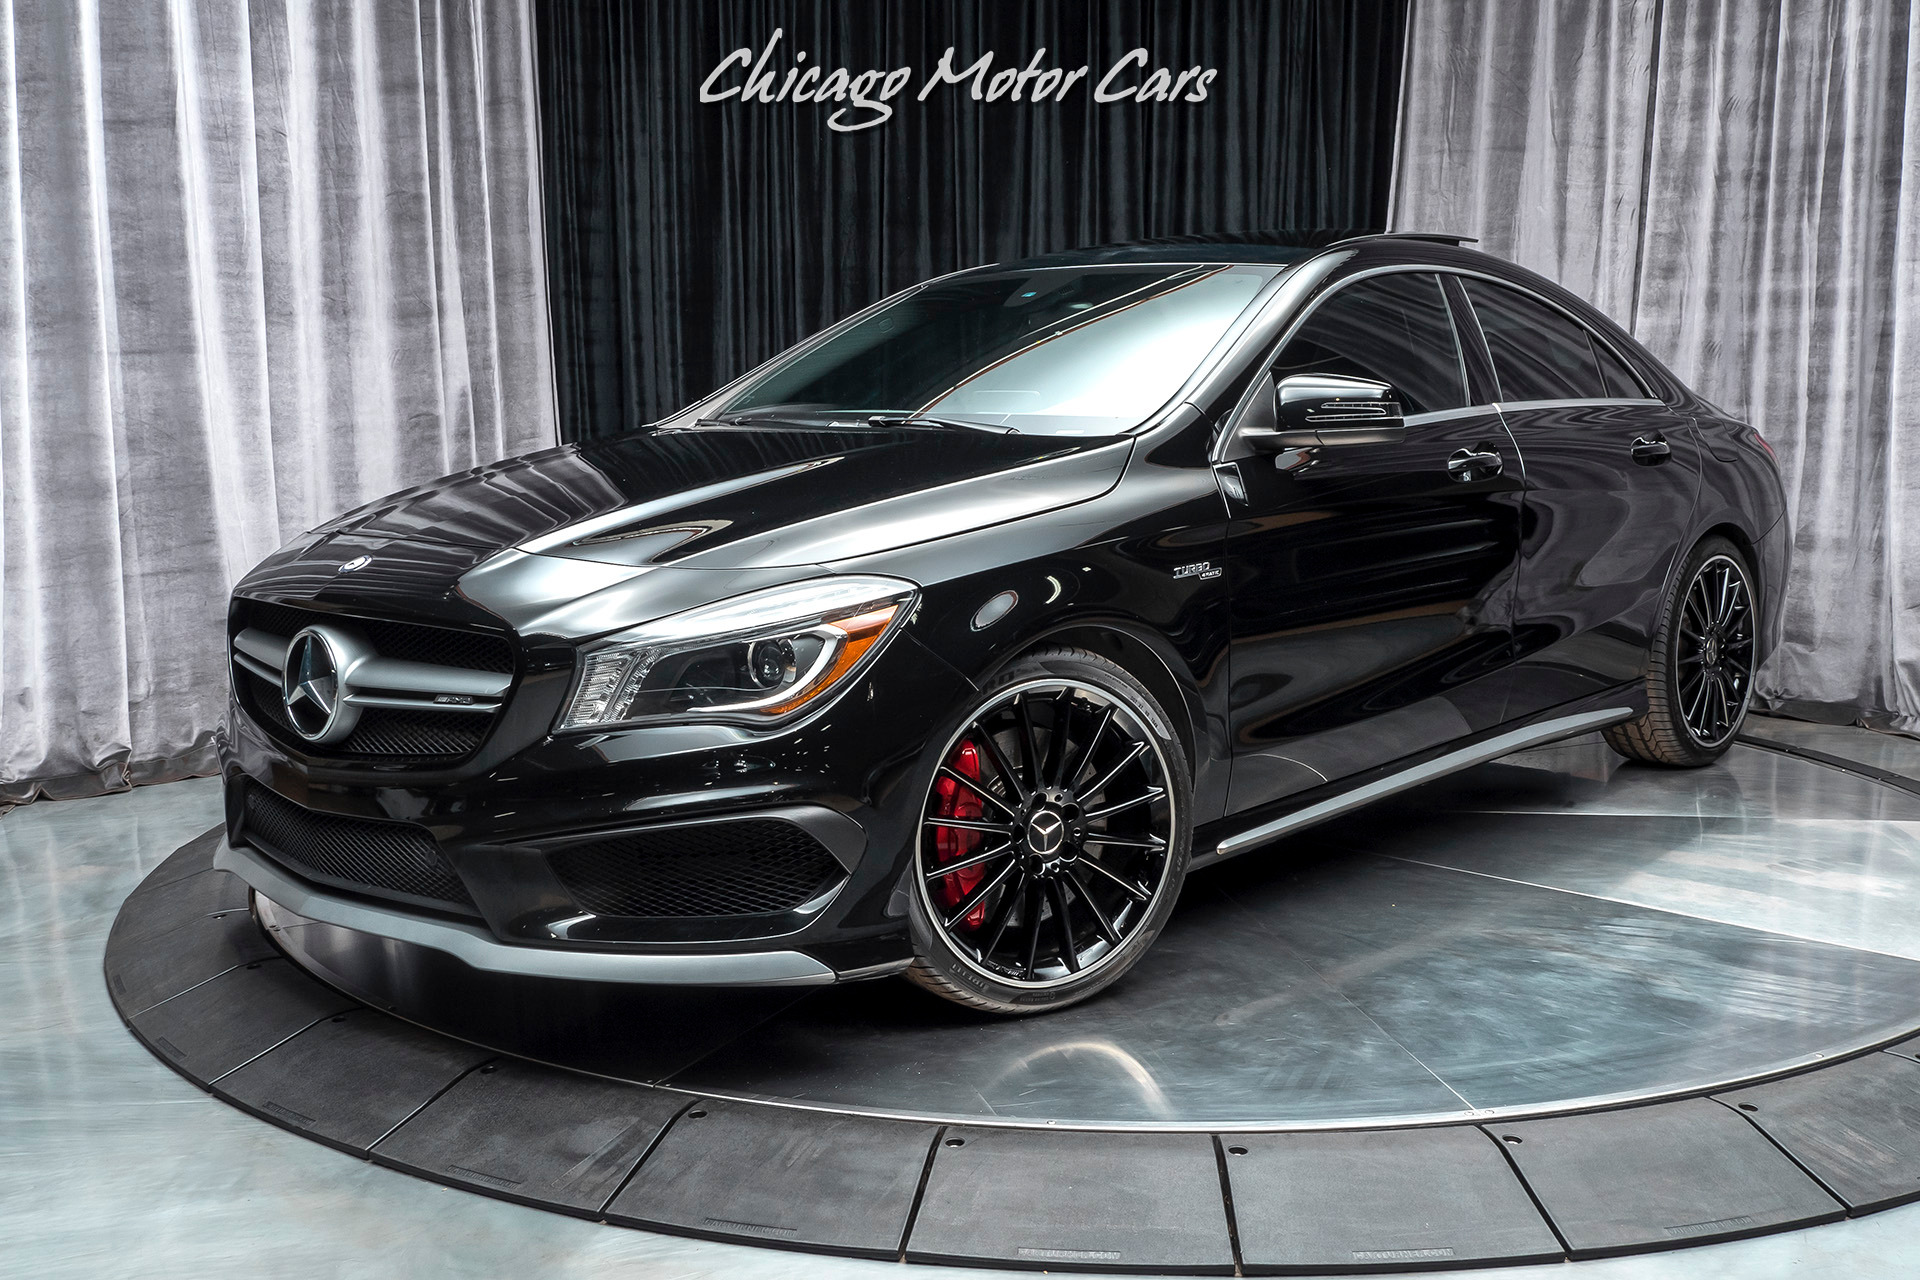 Used 2016 Mercedes-Benz CLA45 AMG Sedan MSRP $64K+ MULTIMEDIA PACKAGE! AMG  PERFORMANCE SEATS! For Sale (Special Pricing) | Chicago Motor Cars Stock  #16666